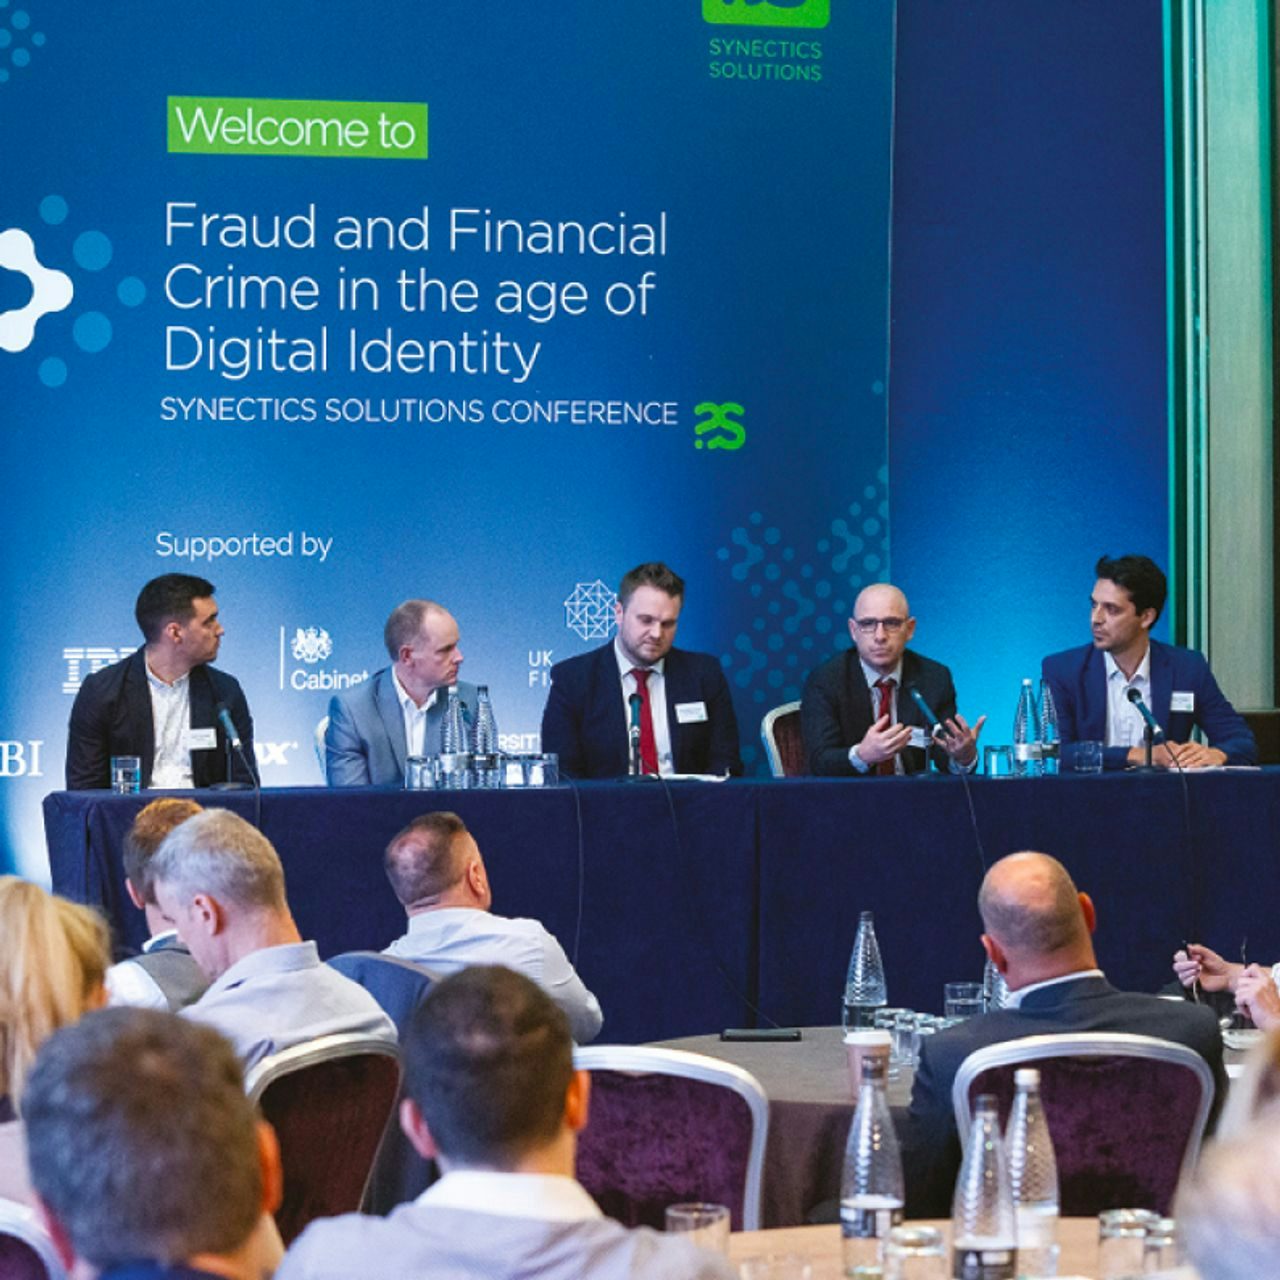 Panel discussion at the Synectics Solutions Conference on 'Fraud and Financial Crime in the age of Digital Identity,' featuring speakers at a table in front of an audience. 